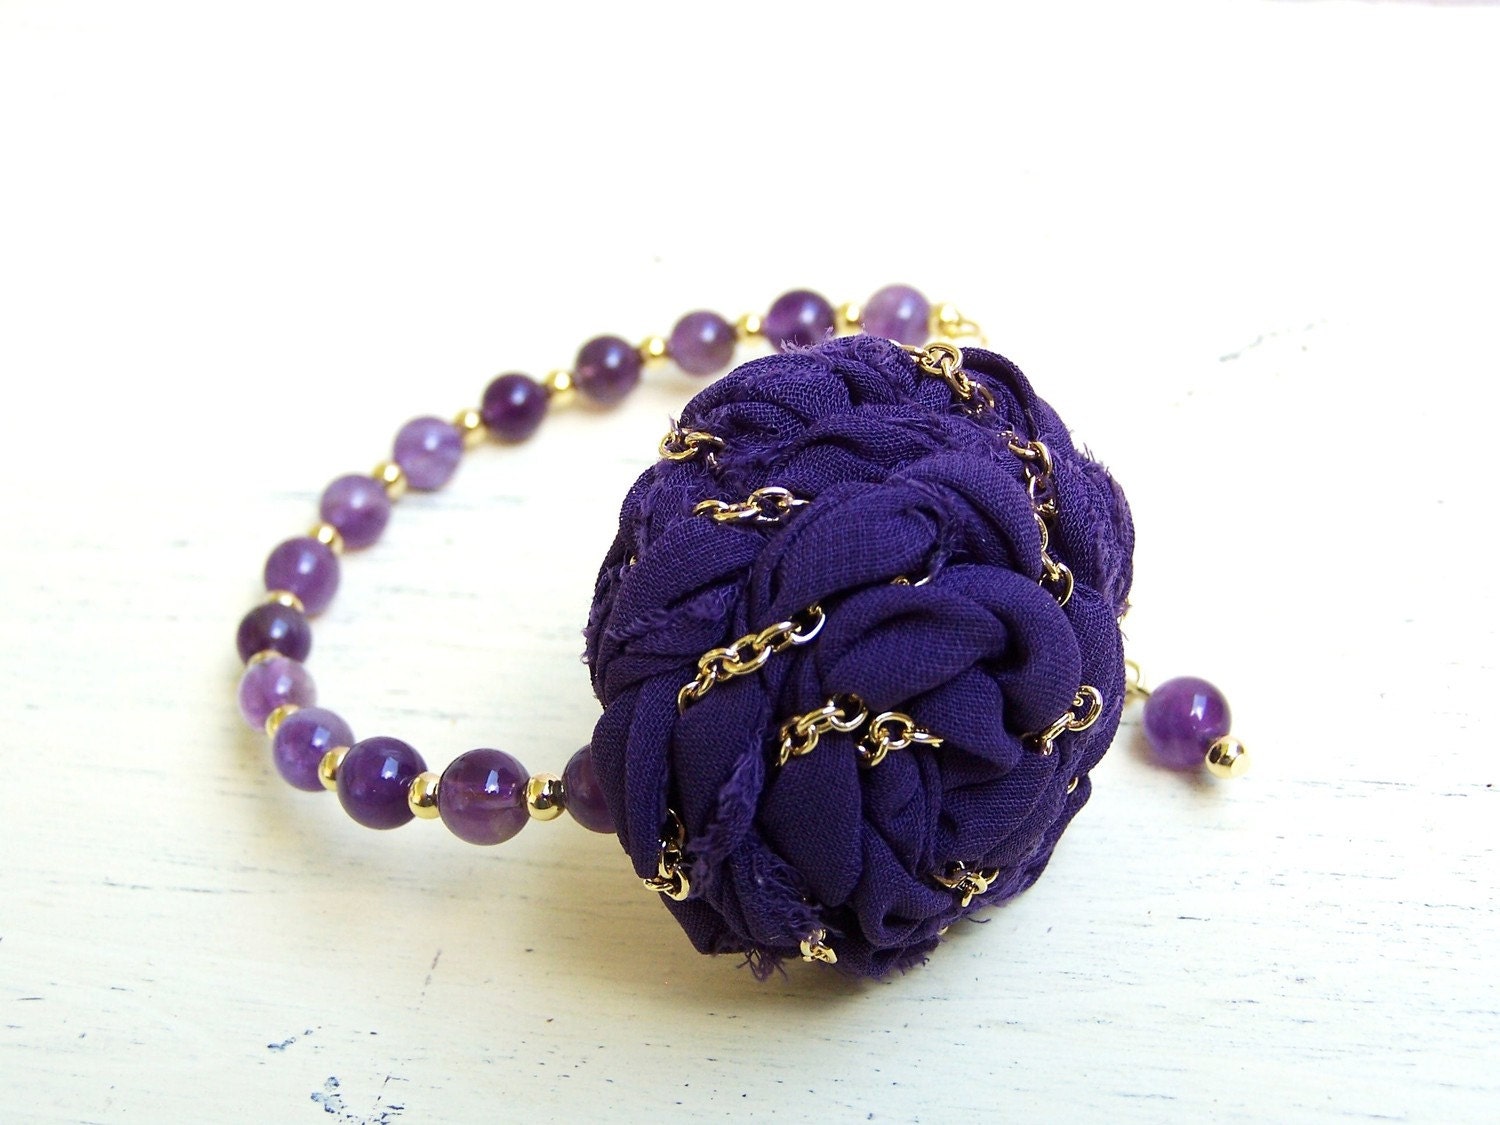 Chained Plum/ Fabric rosette statement bracelet with beads